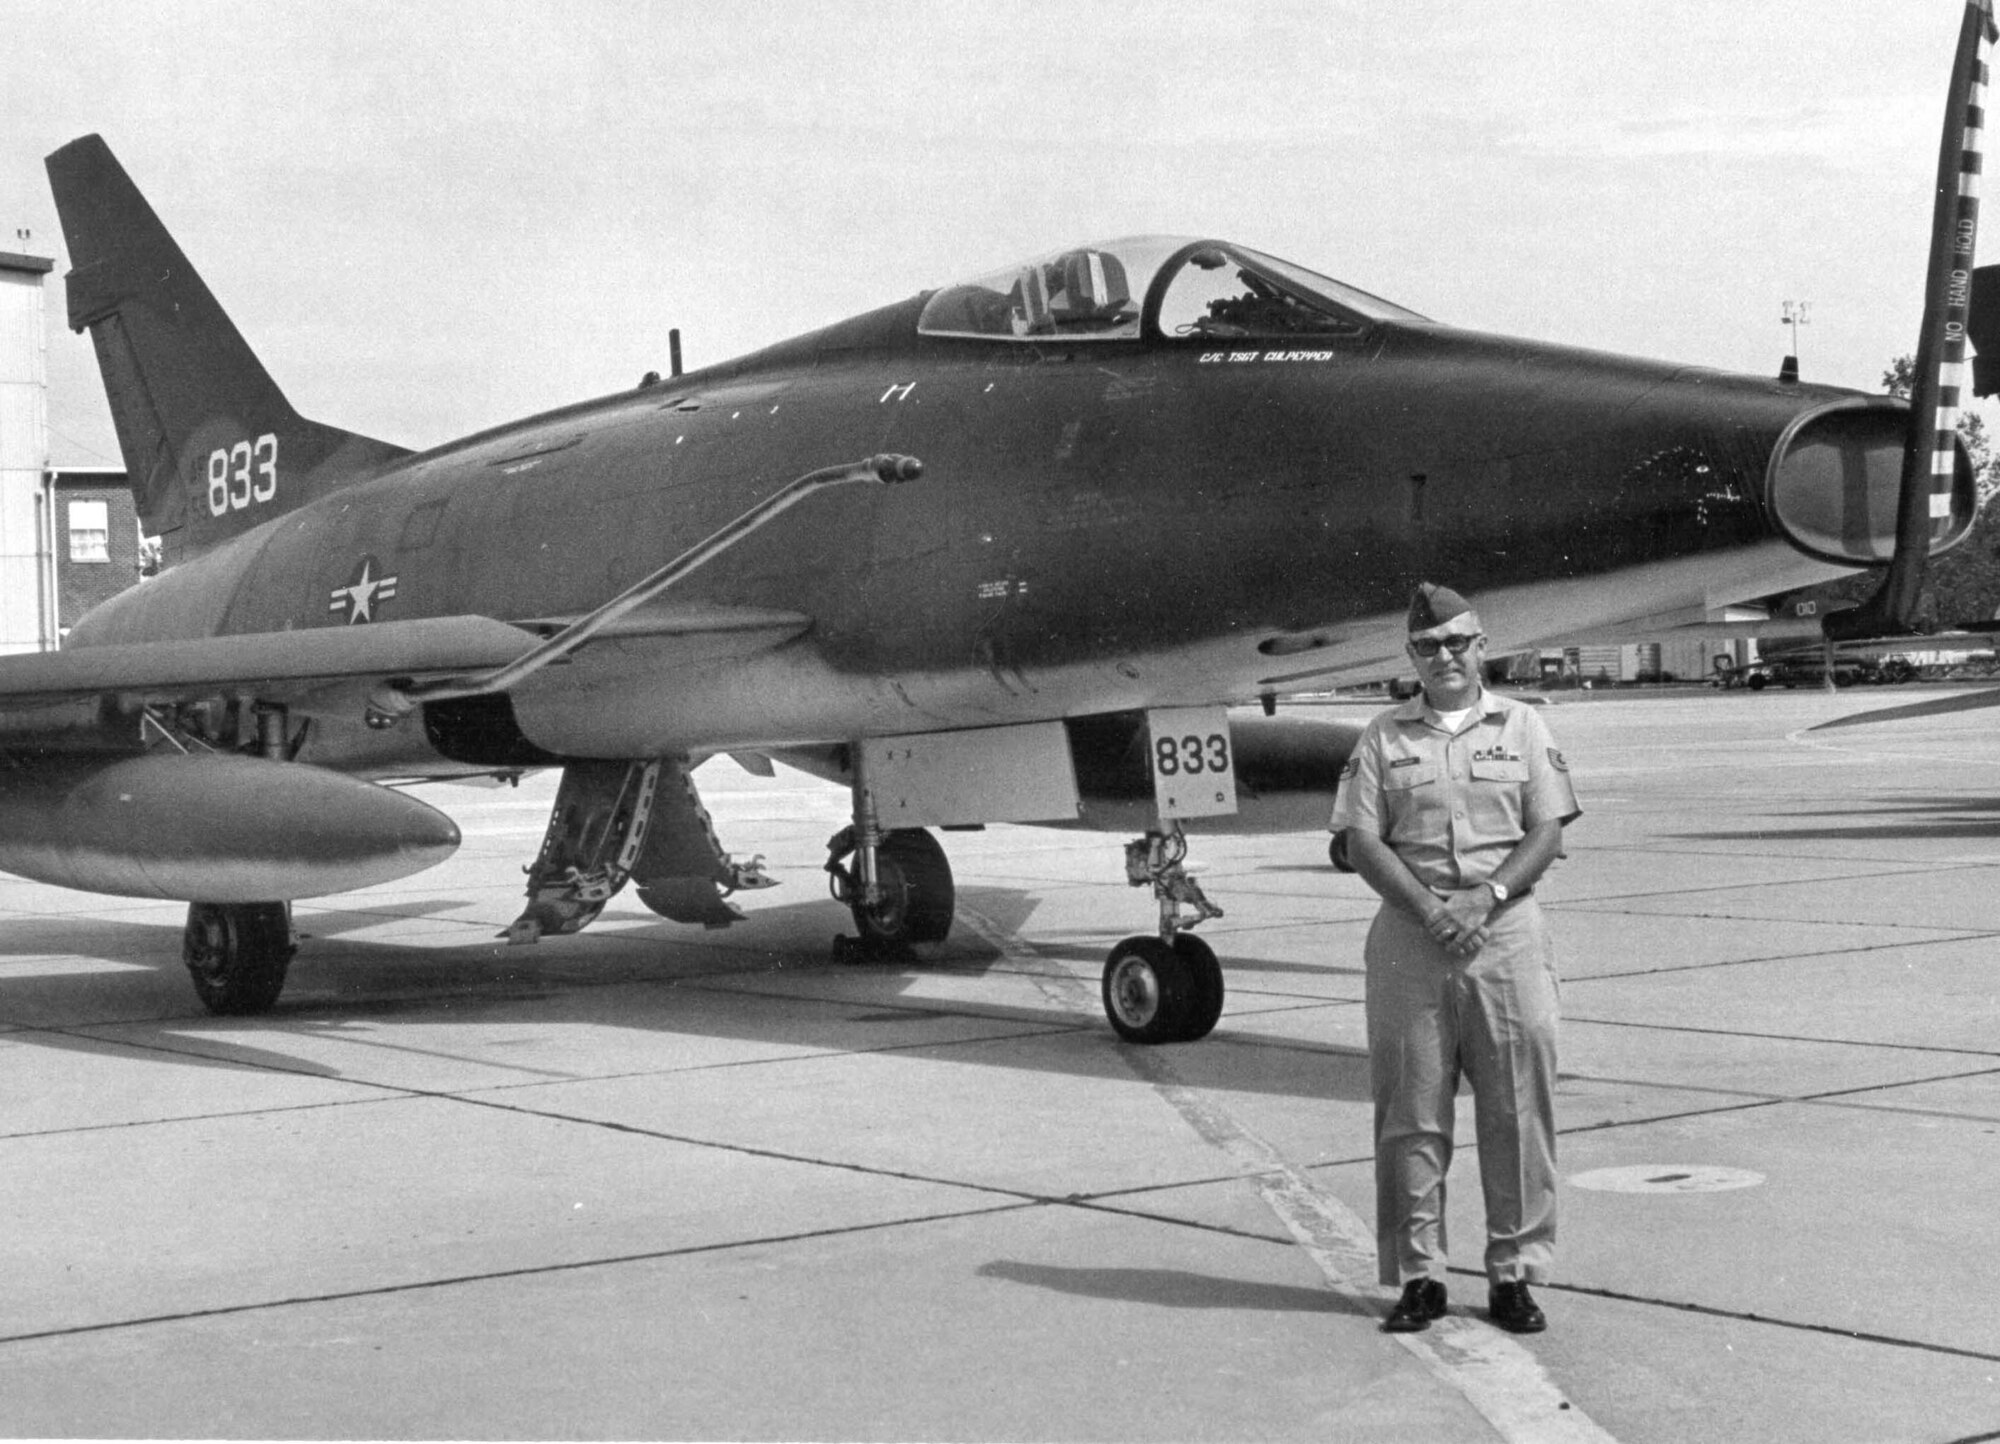 Tech. Sgt. Karl Mounger poses in front of an F-100 at Ebbing Air National Guard Base, Fort Smith, Ark., in 1975. Mounger was chosen as Outstanding Non-Commissioned Officer of the Year that year. (Courtesy photo)